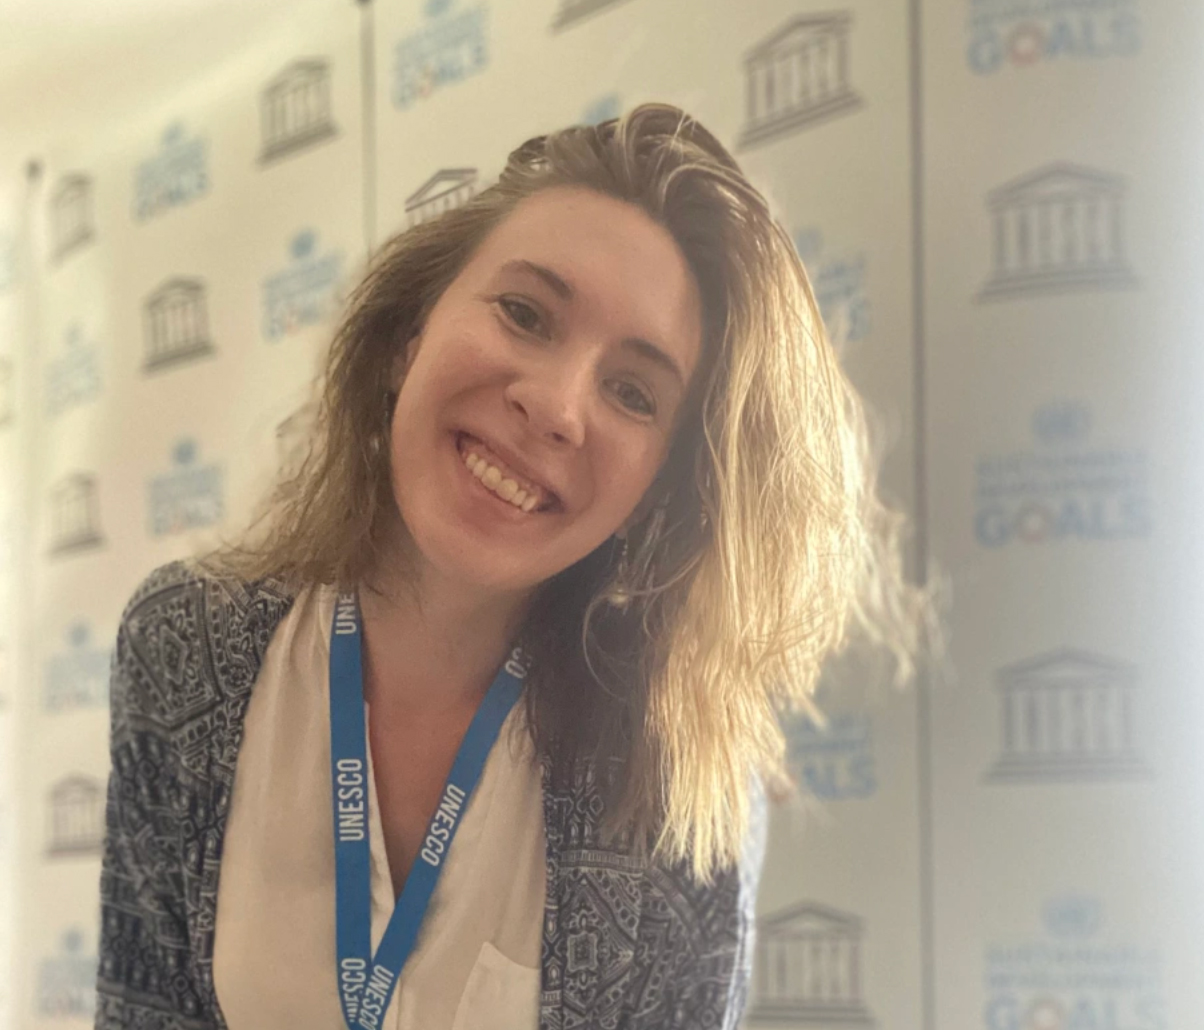 Hayley smiles at the camera wearing a UNESCO lanyard in front of a UNESCO backdrop on her first day in the office